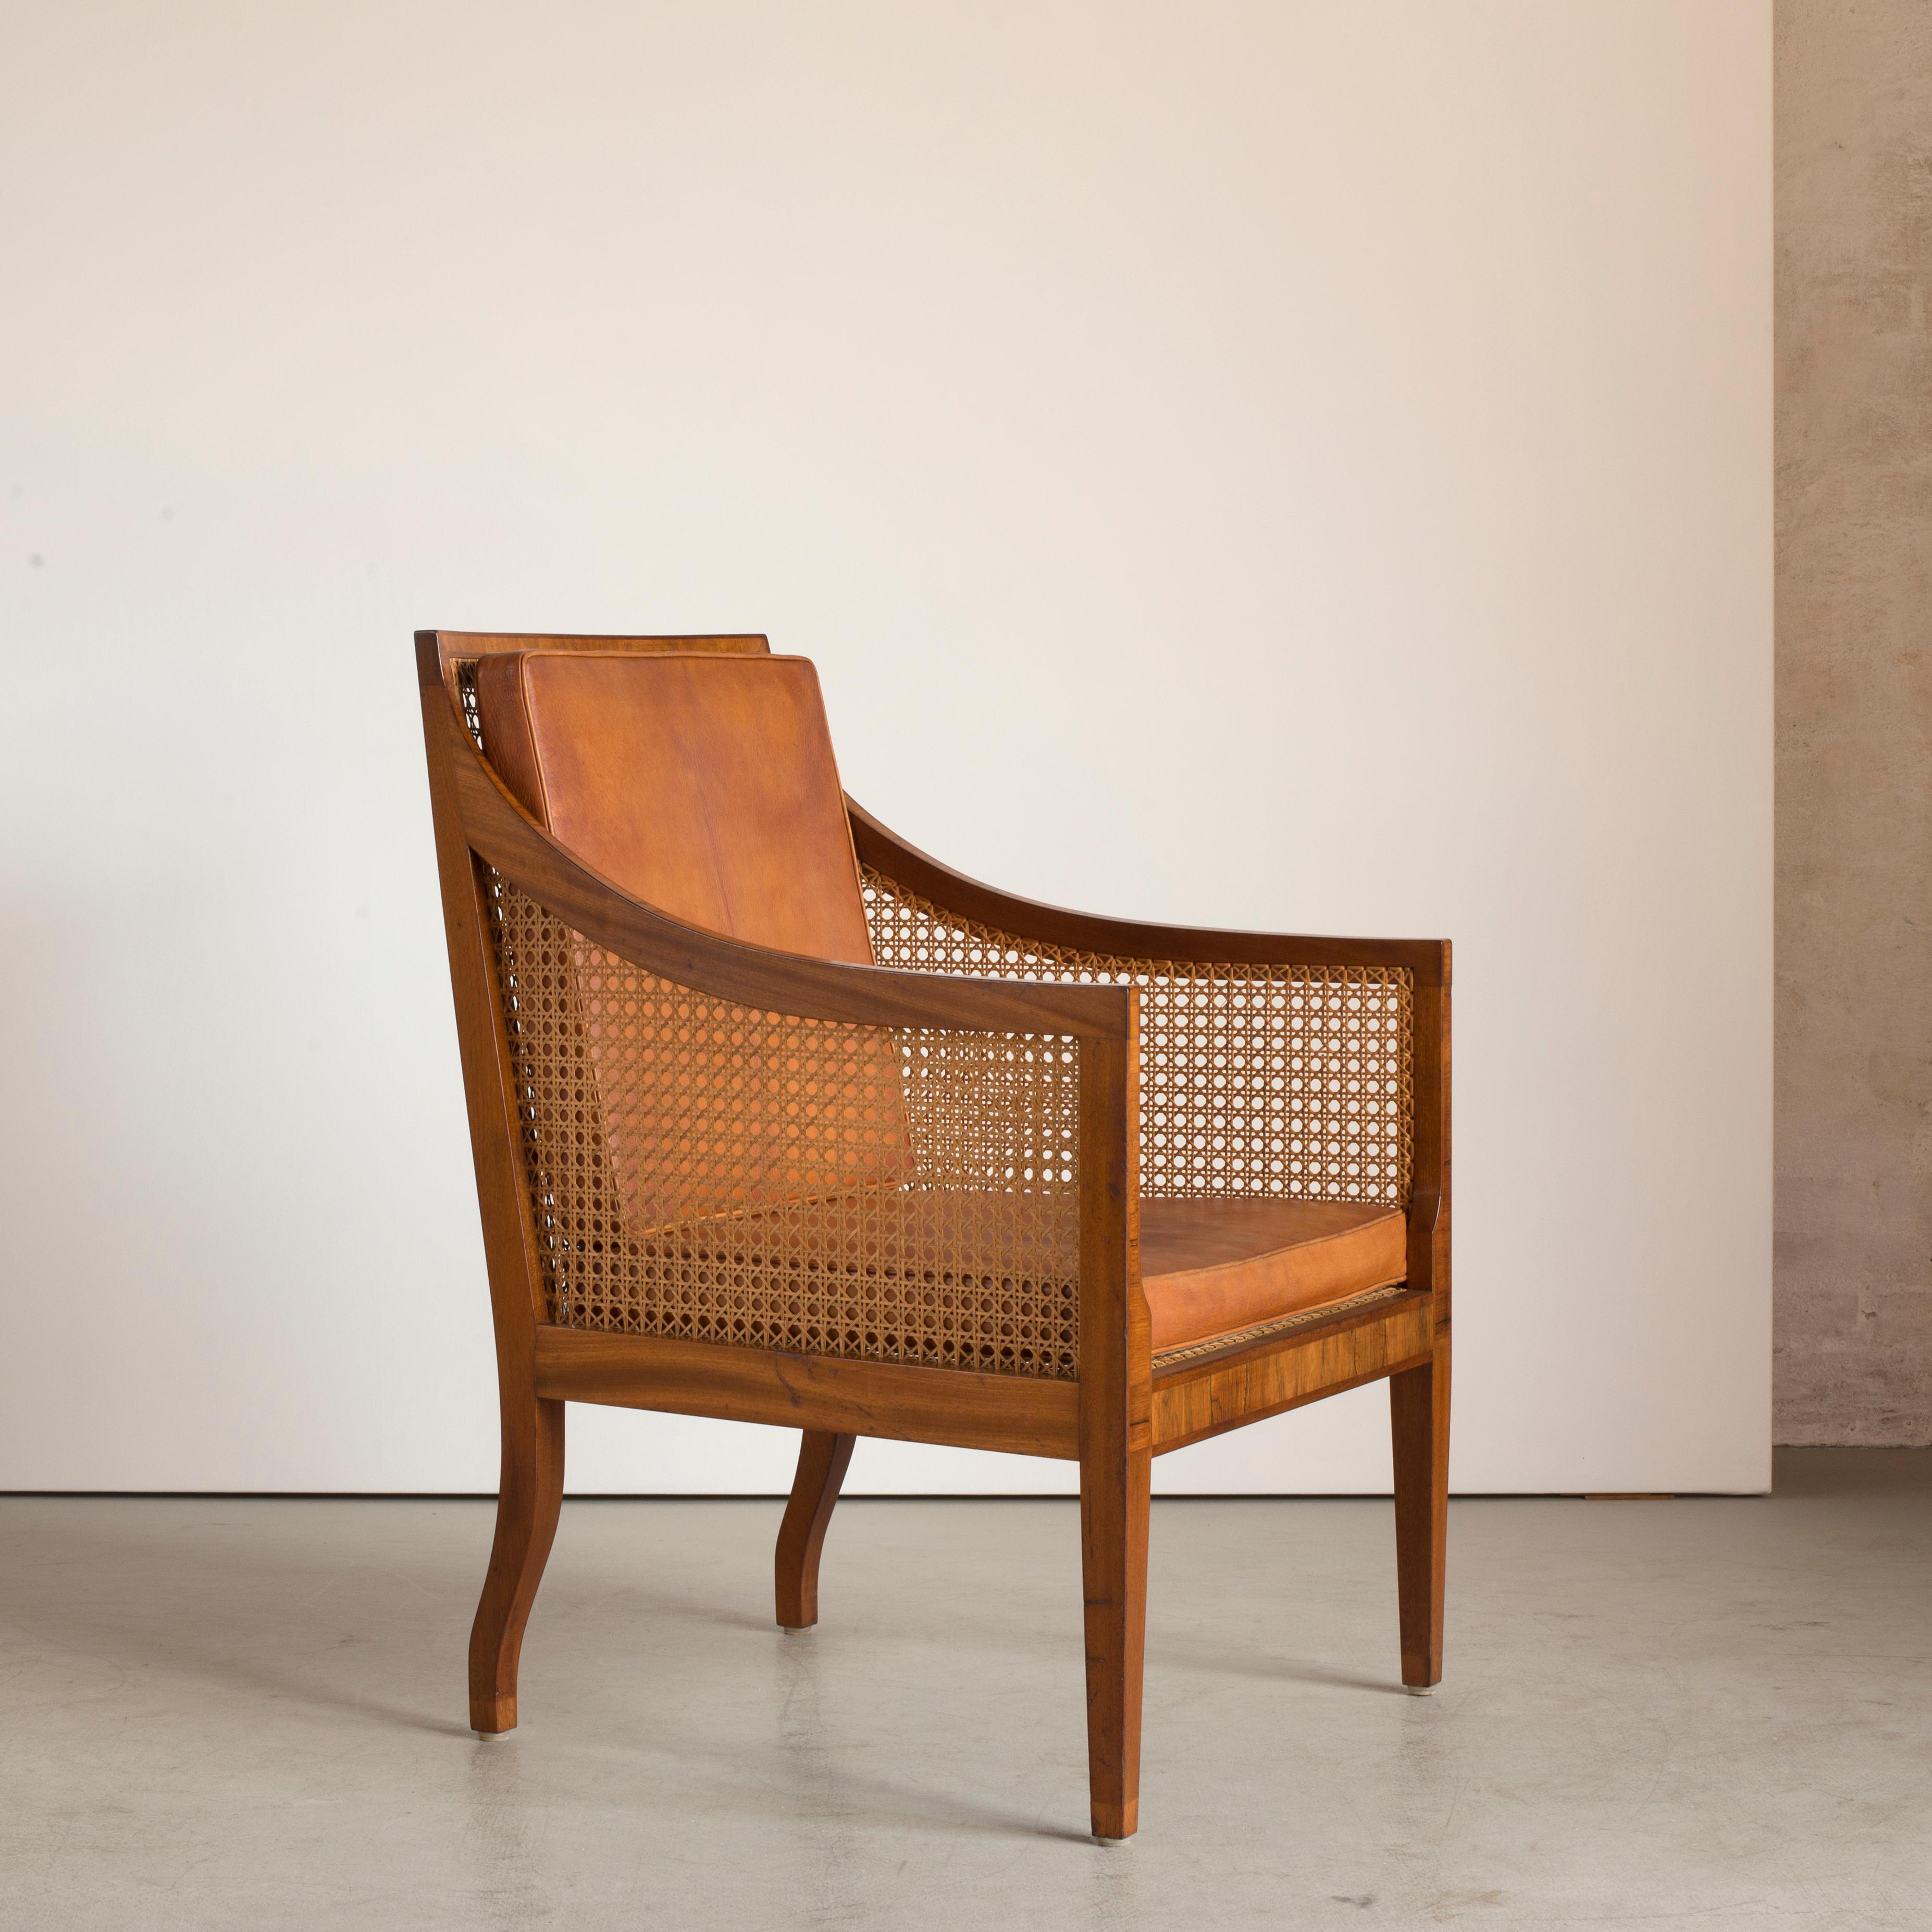 Kaare Klint Bergere of Mahogany. Sides, seat and back with woven cane. Loose cushions in seat and back upholstered with patinated niger leather. Executed by Rud. Rasmussen Cabinetmakers.

Reverse with paper label ‘Rud.